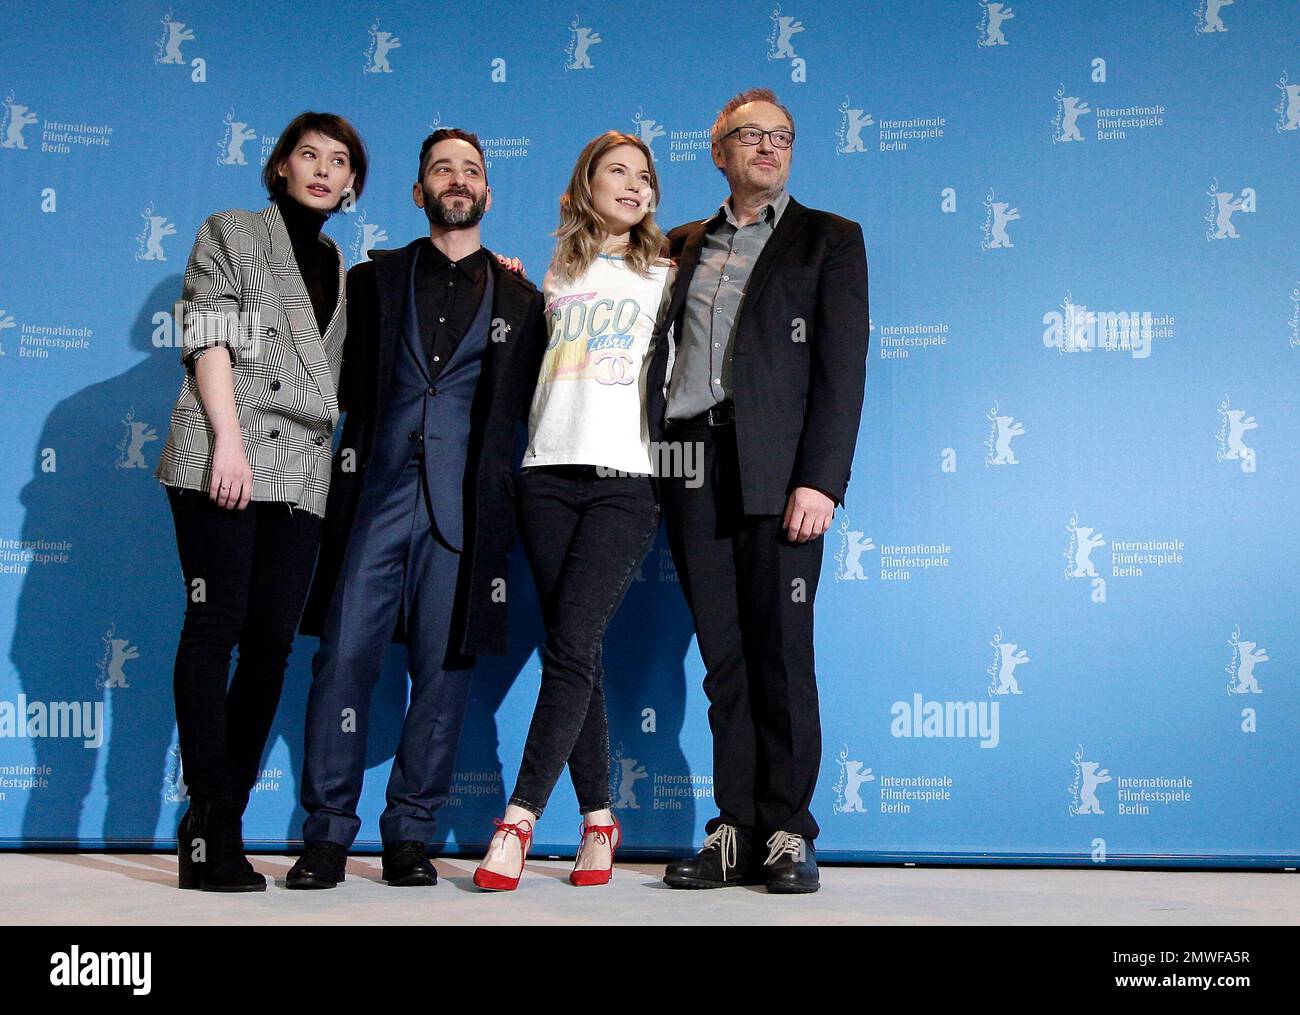 From left, actress Crina Semciuc, actor Denis Moschitto, actress Nora von  Waldstaetten and director Josef Hadrer pose for the photographers during a  photo call for the film 'Wild Mouse' at the 2017